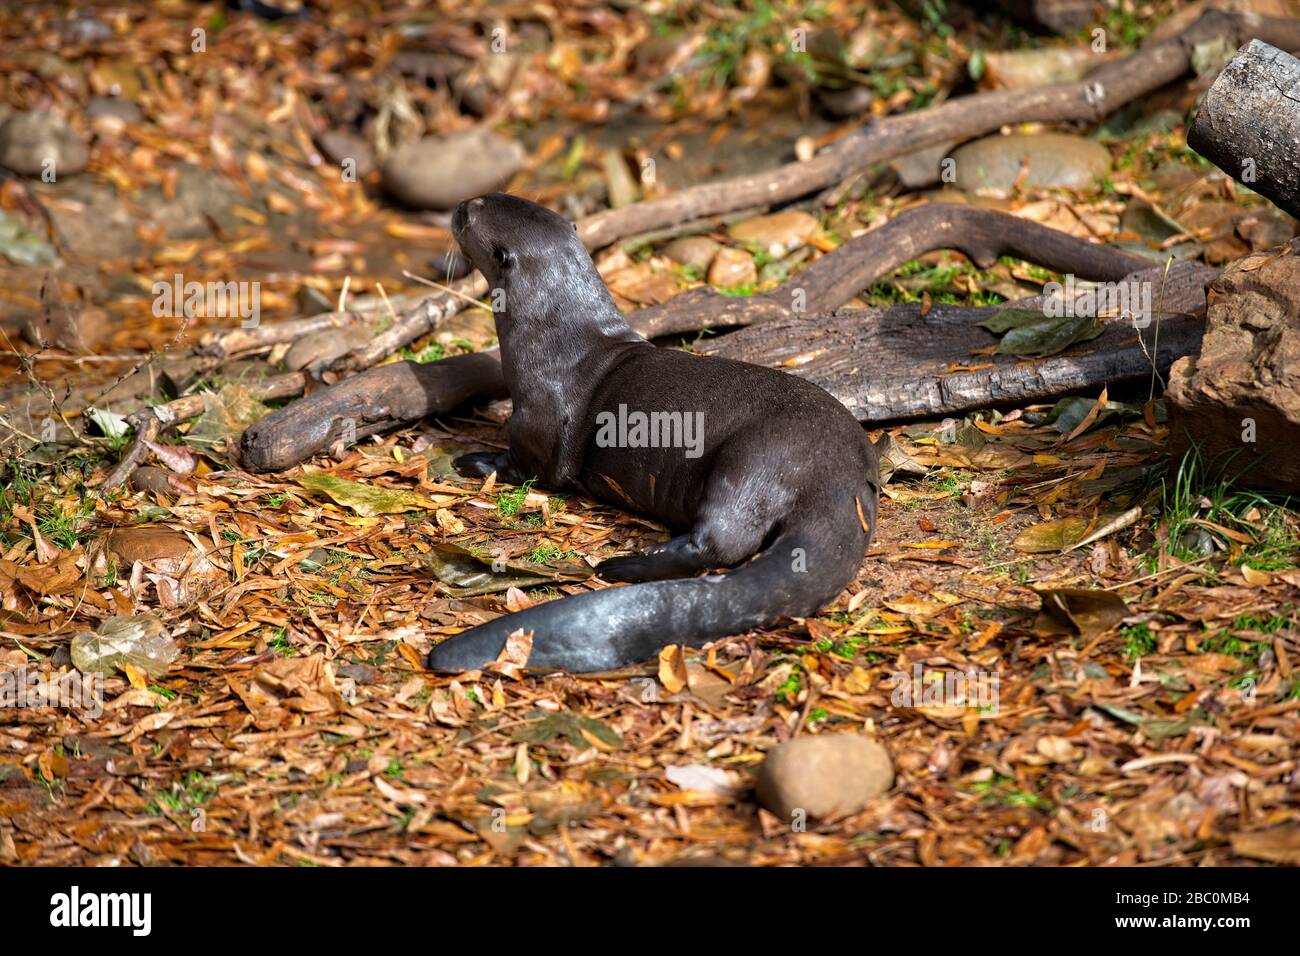 Giant Otters at a Zoo Stock Photo